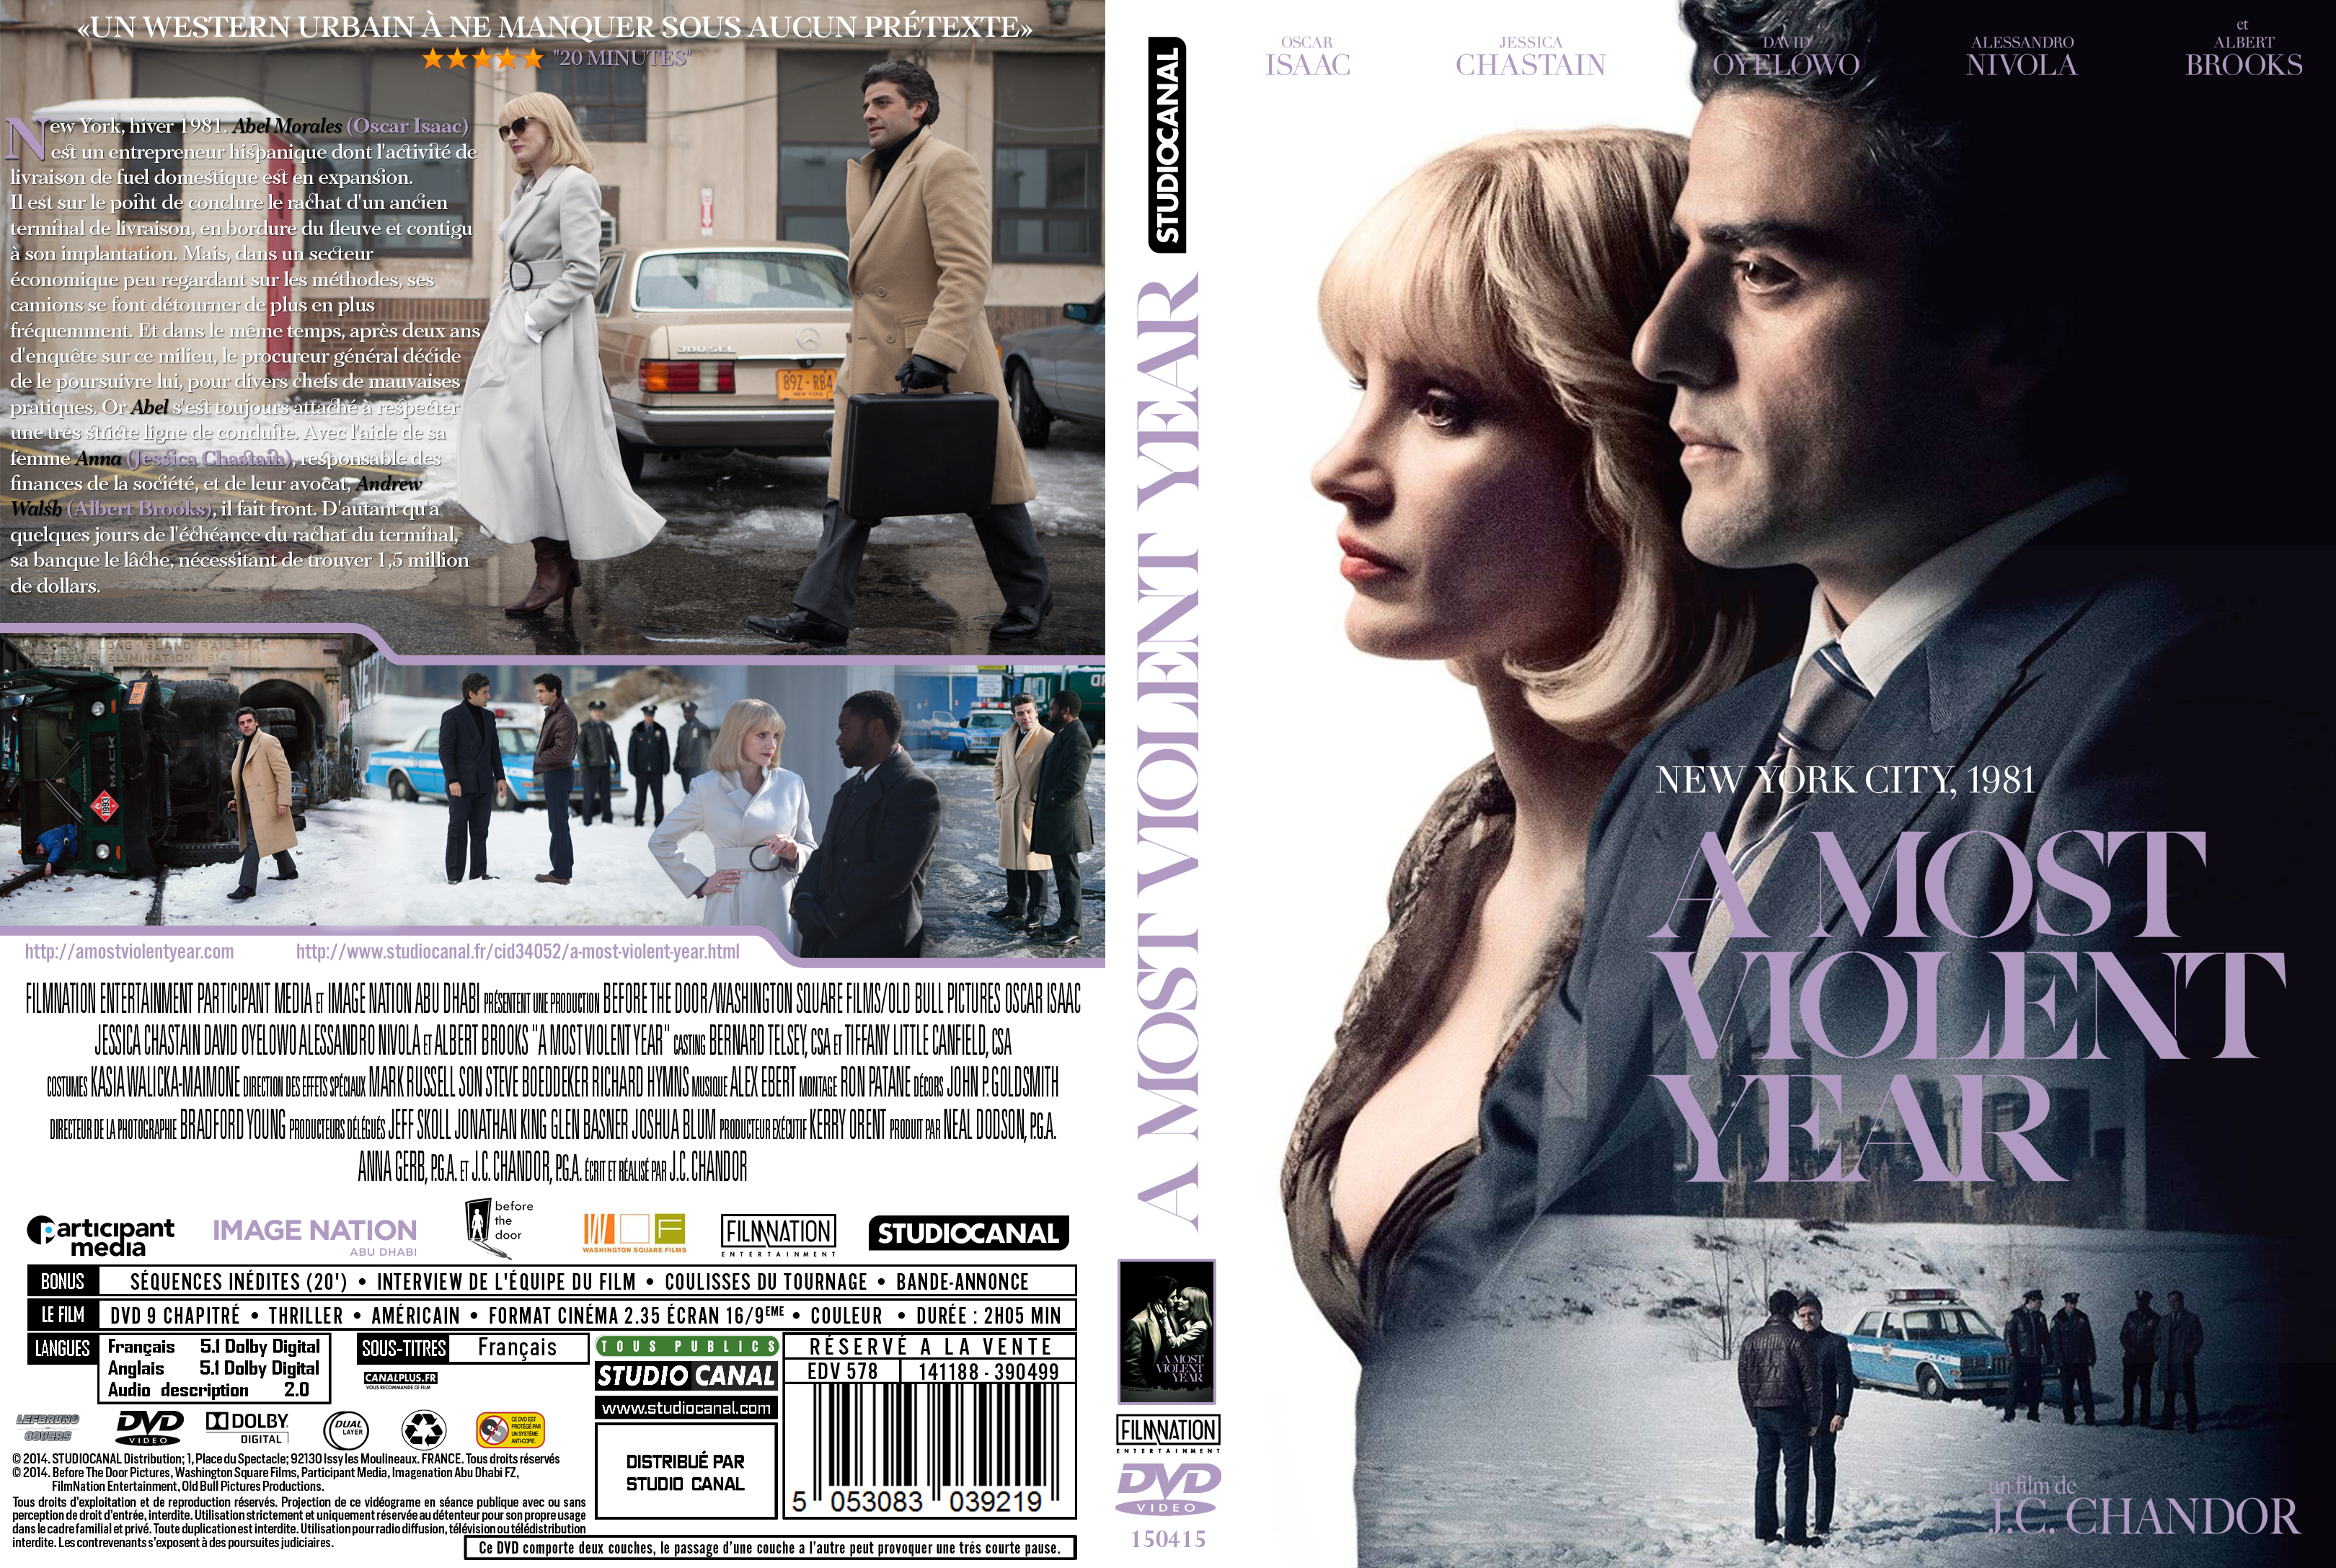 Jaquette DVD A Most Violent Year custom